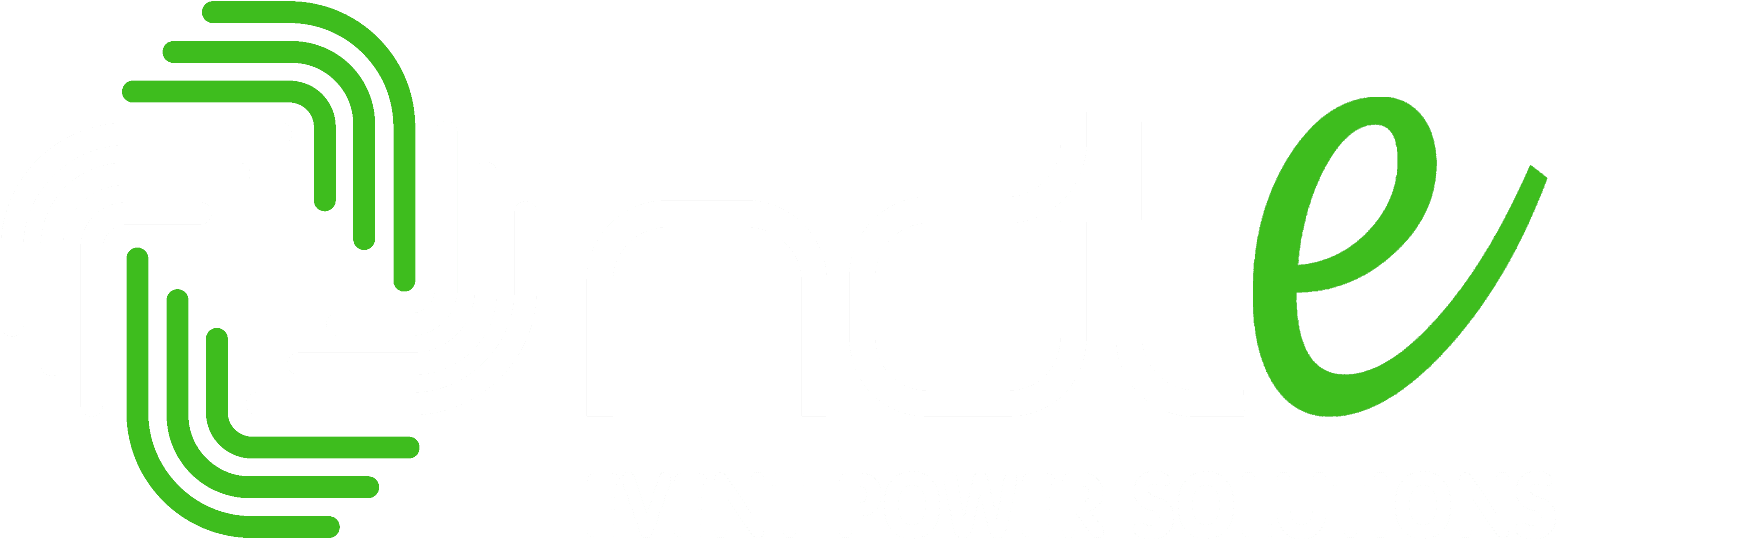 NDL Event Power Solutions logo